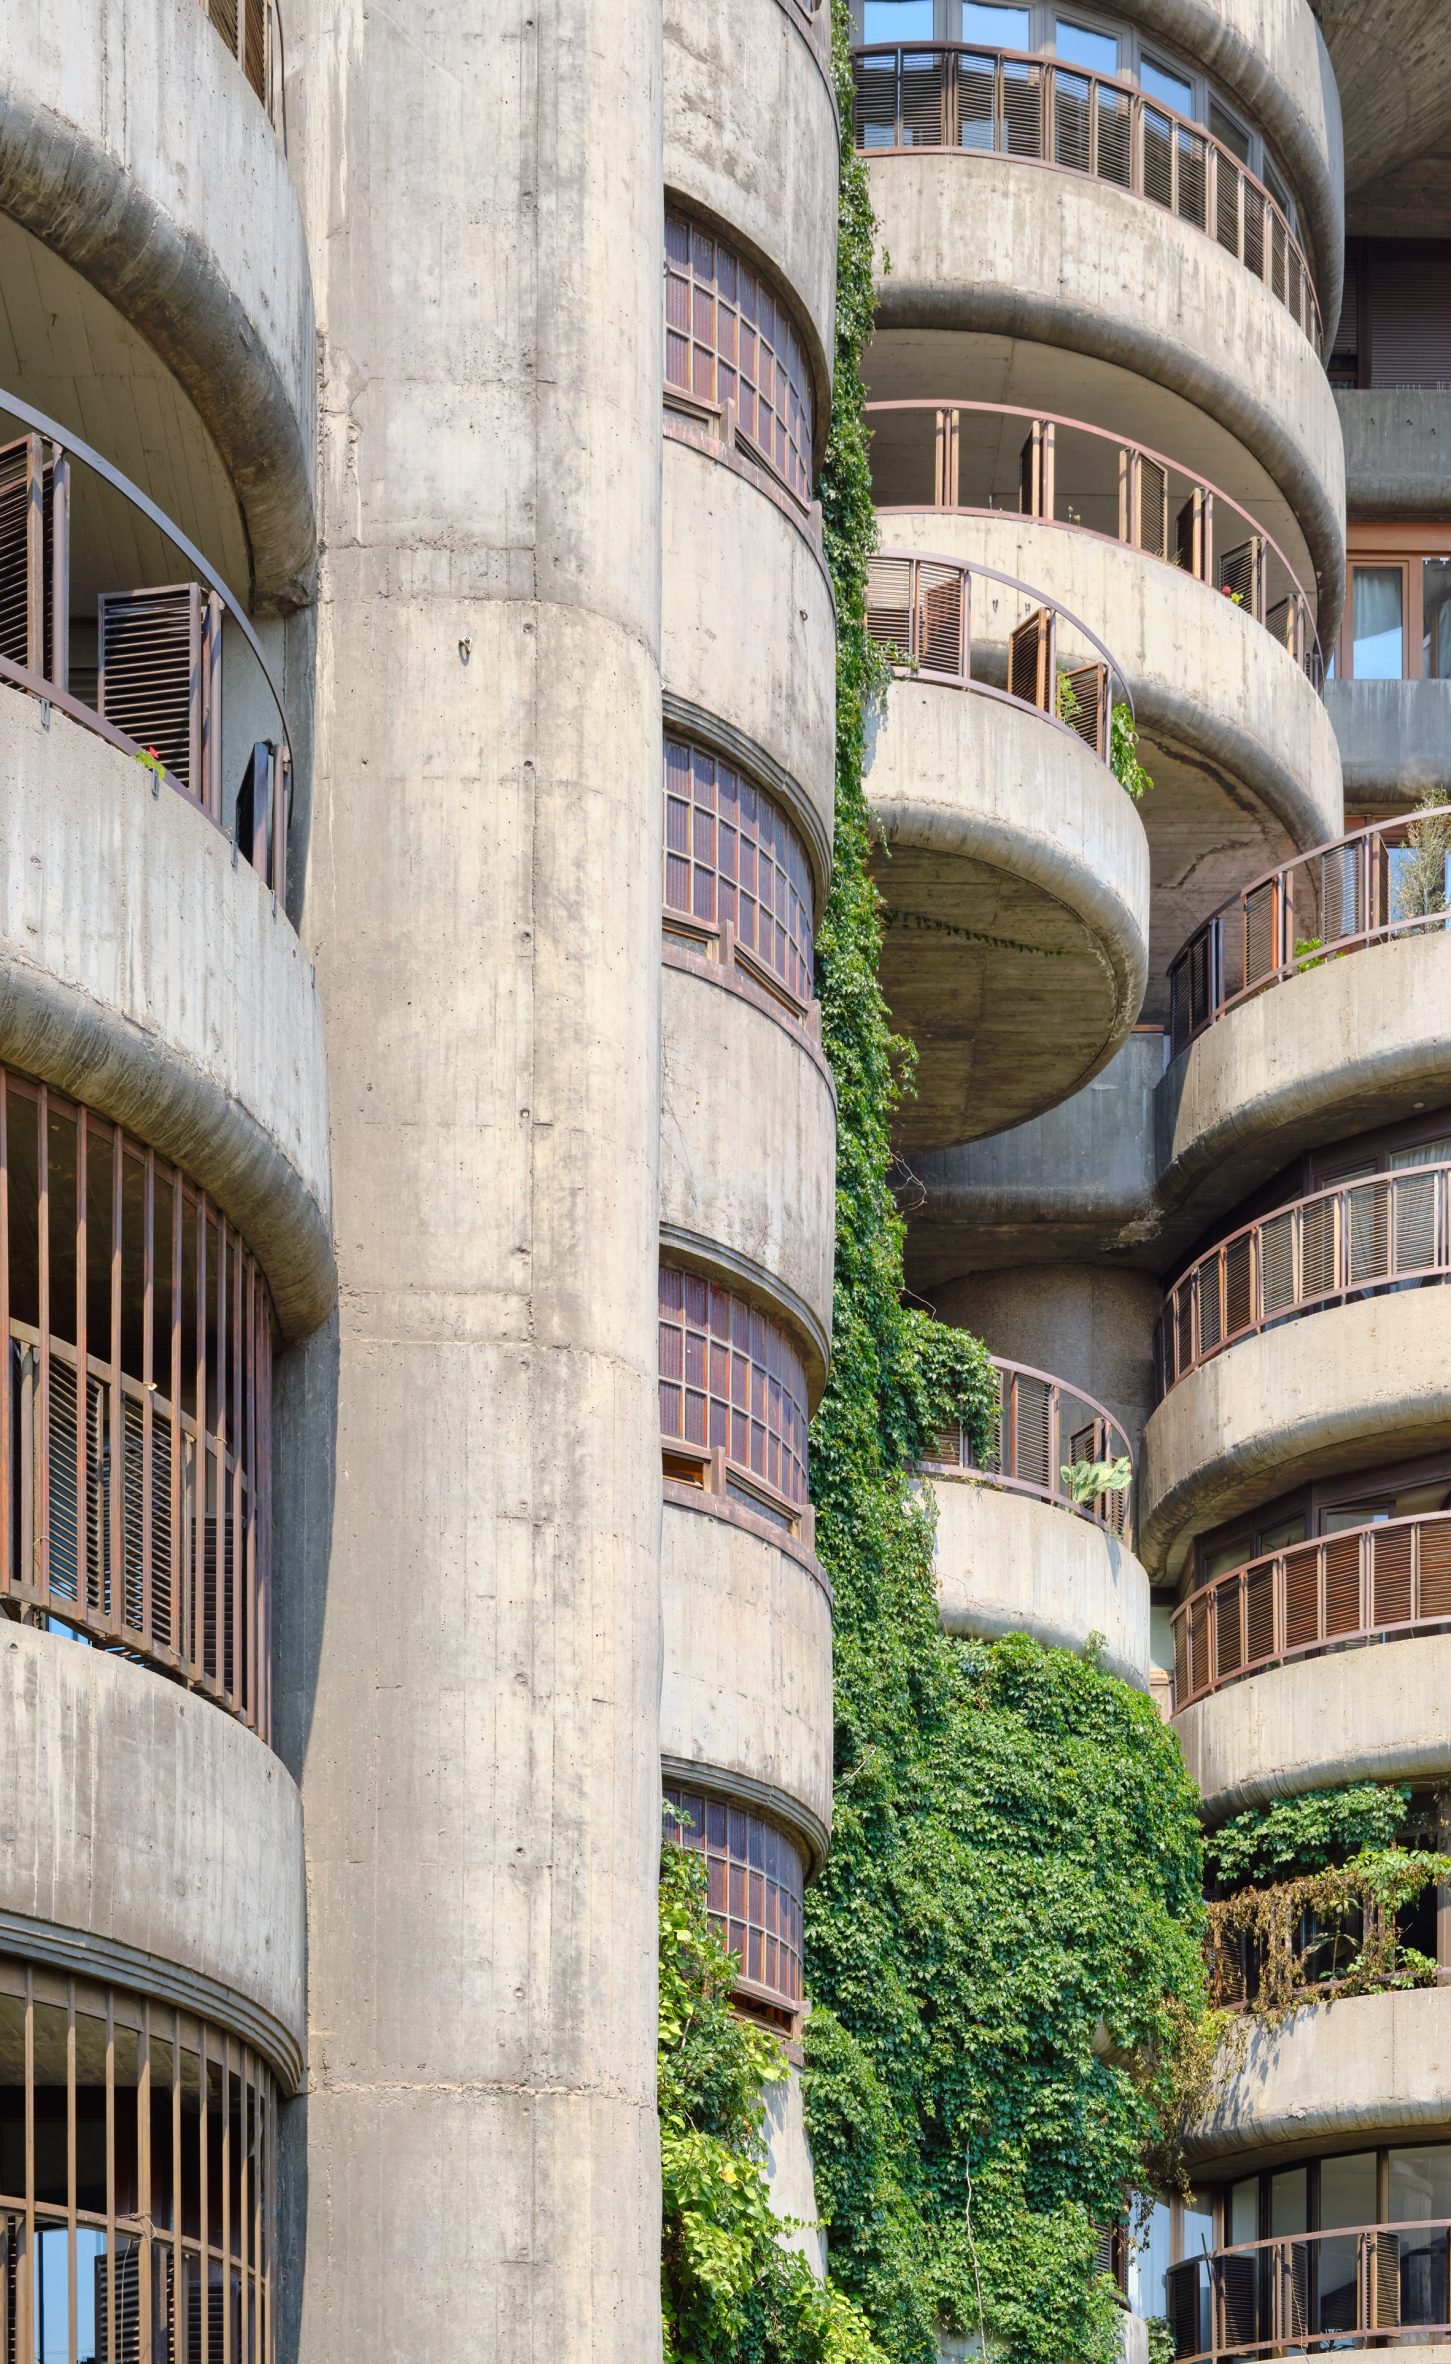 The cylindrical facade of Torres Blancas, a brutalist high-rise in Madrid